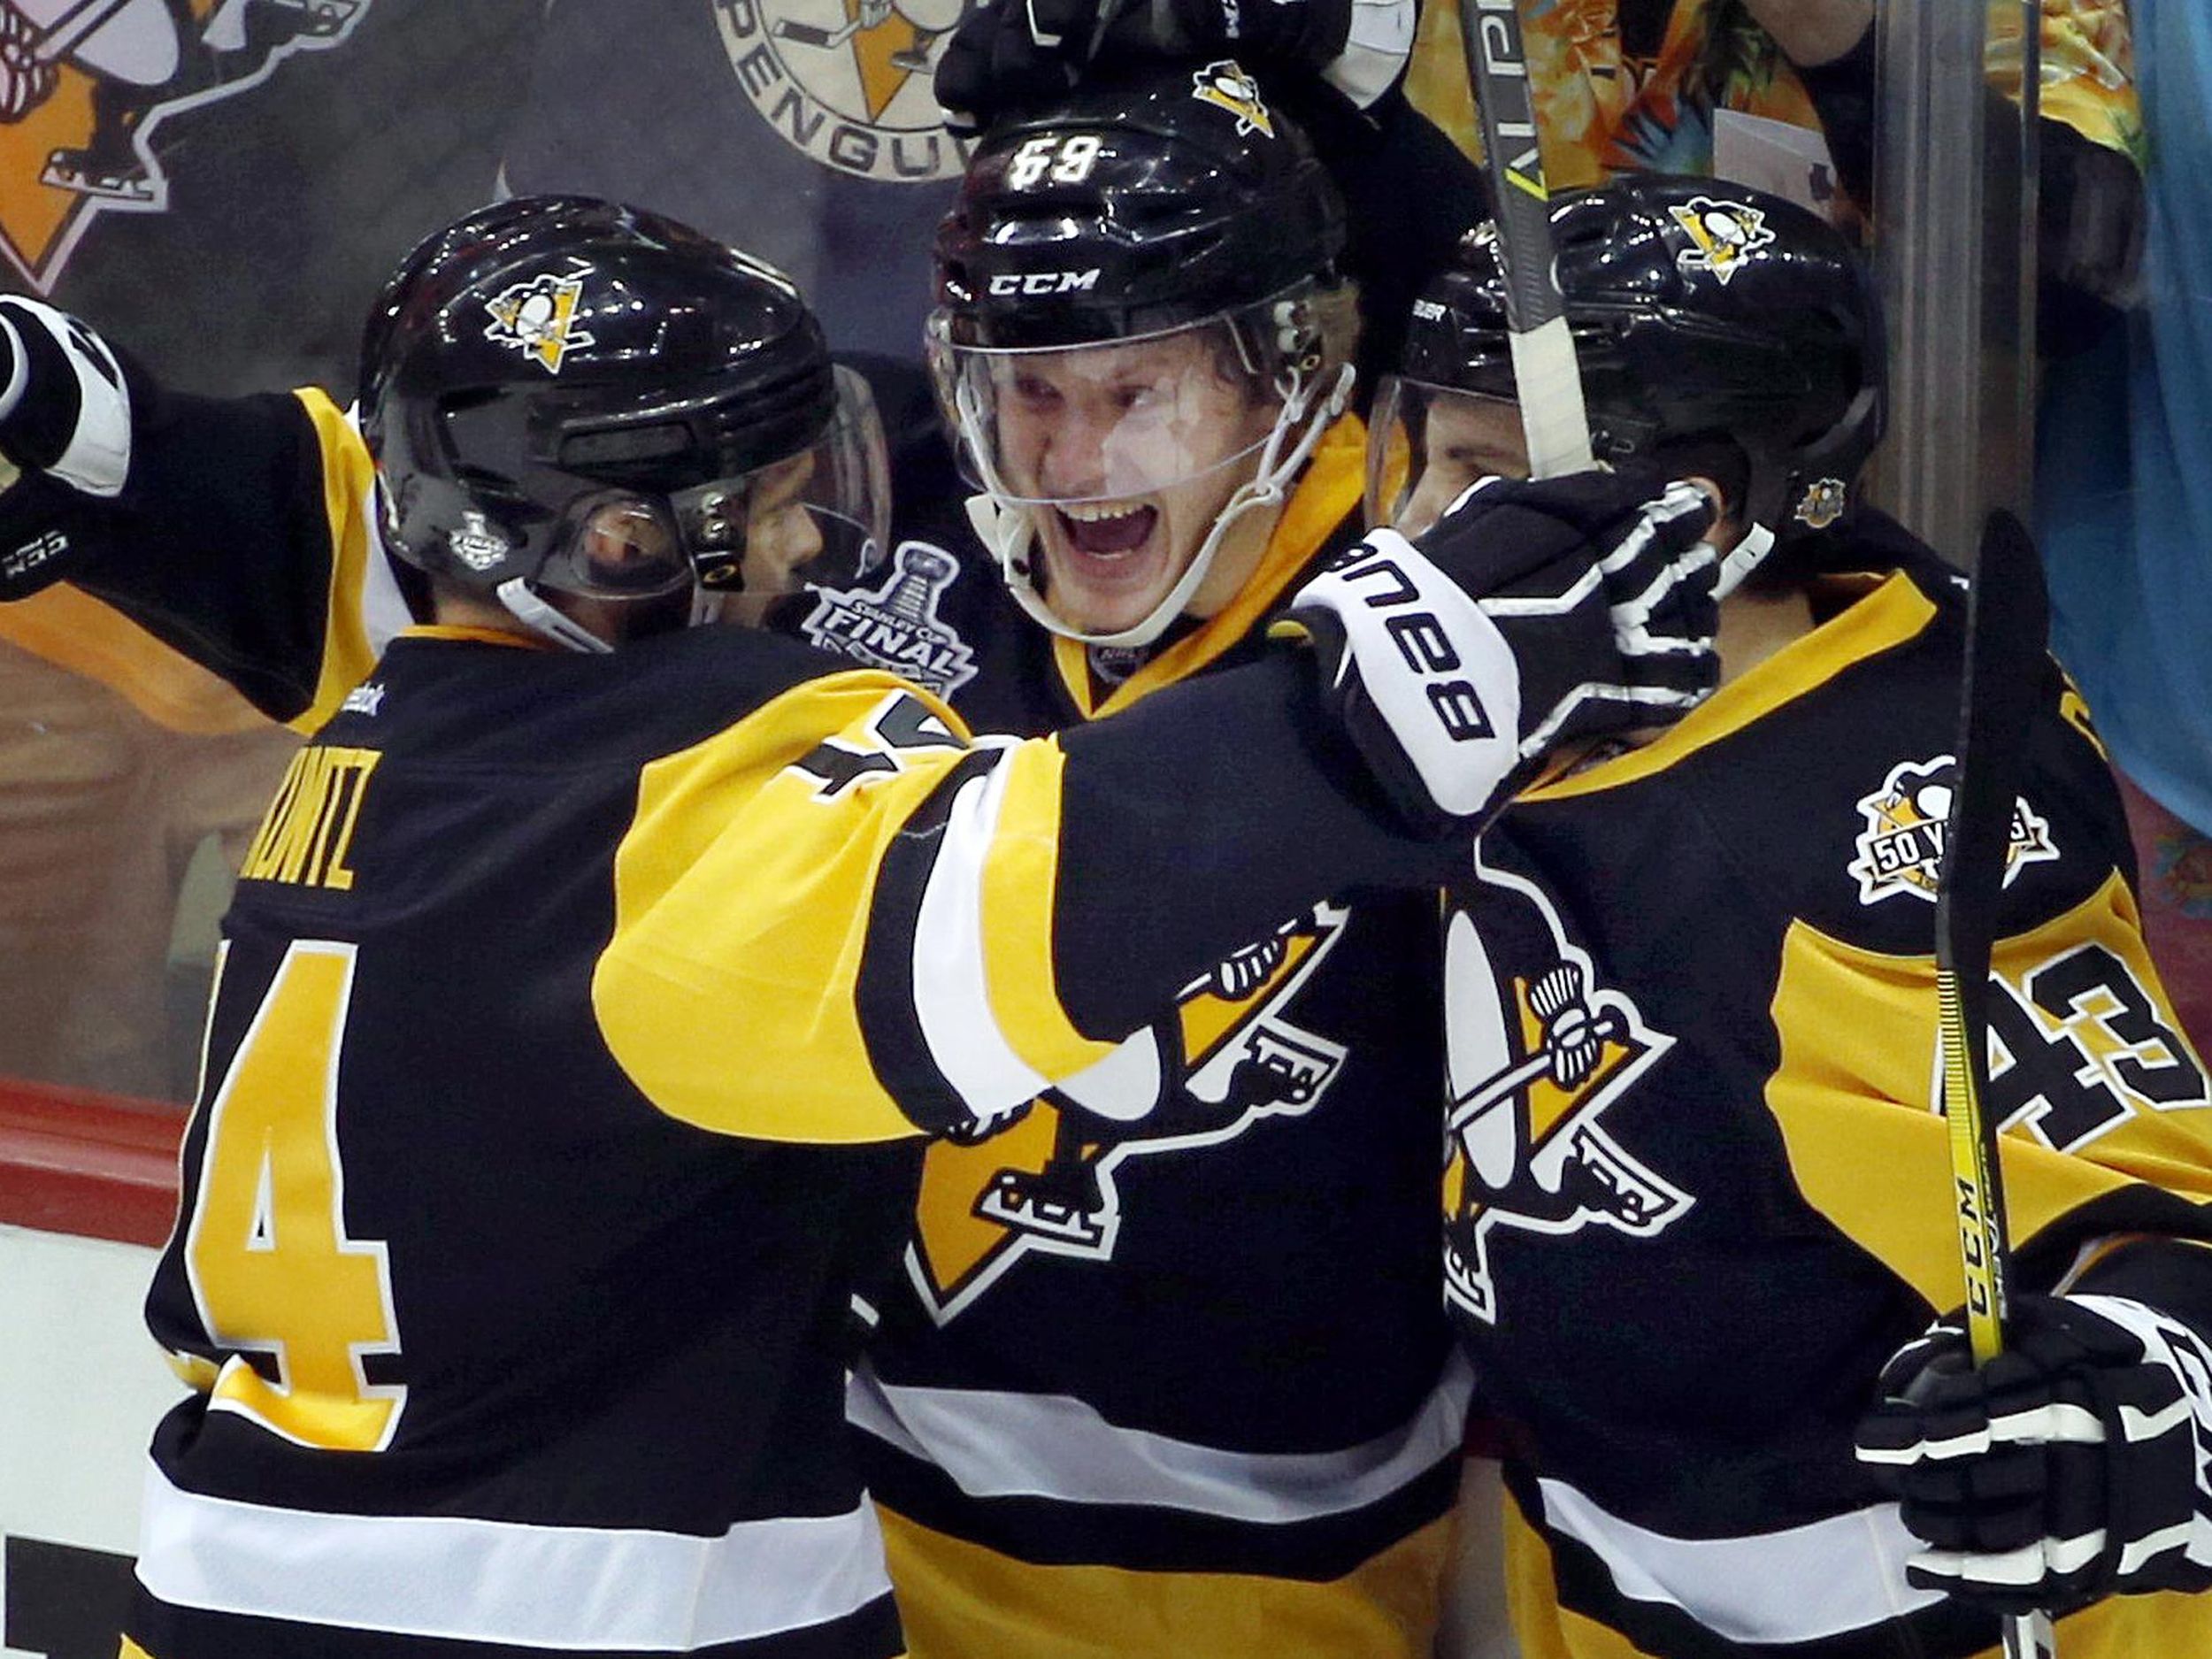 Jake Guentzel climbing record book for Pittsburgh Penguins – The Denver Post